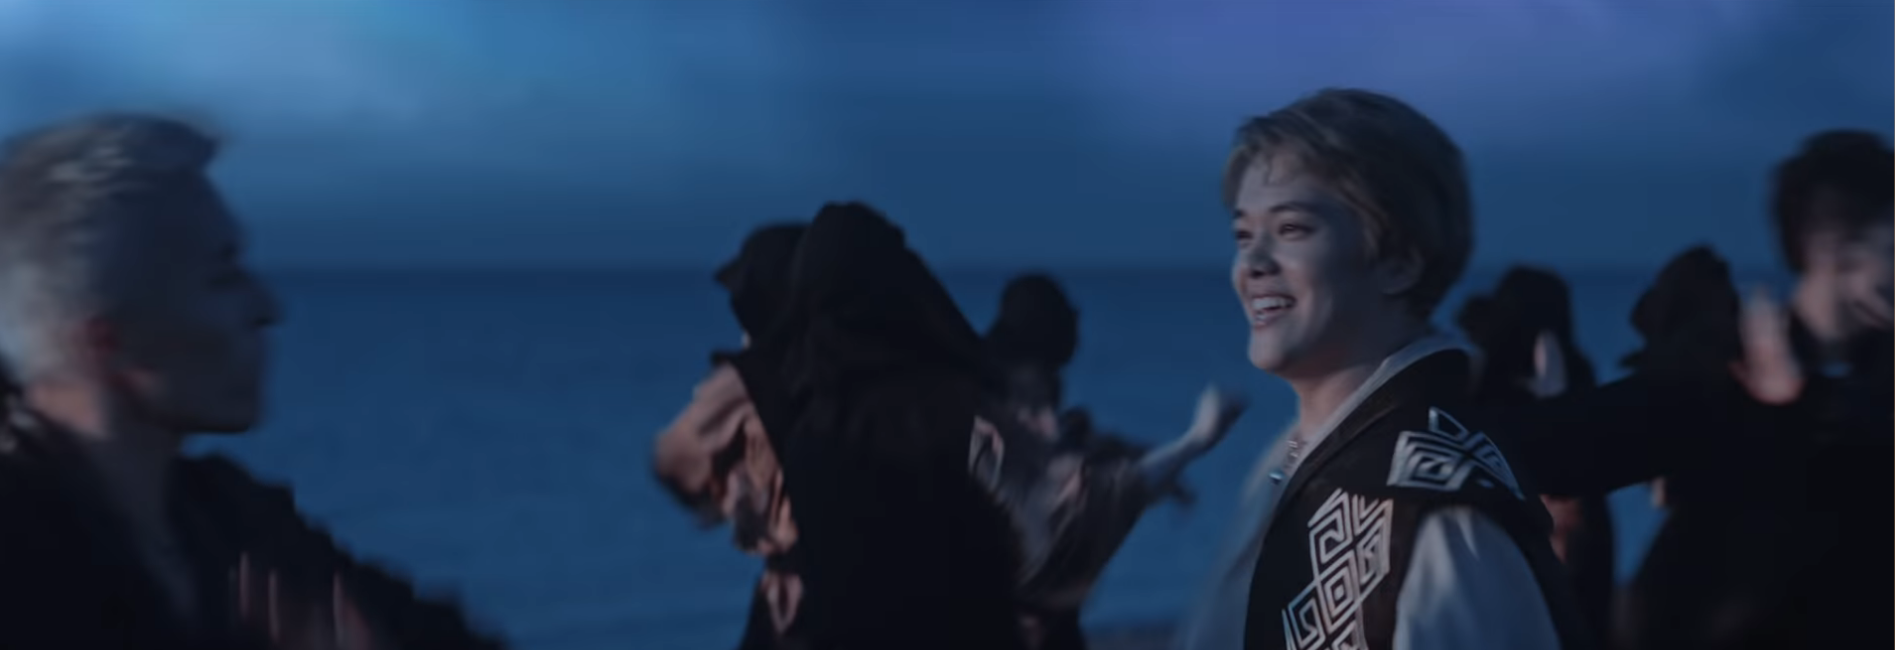 Image of Ninety One and backup dancers at night on the beach, with ZaQ at left, Ace in the center (looking to his left and smiling), and Bala at right